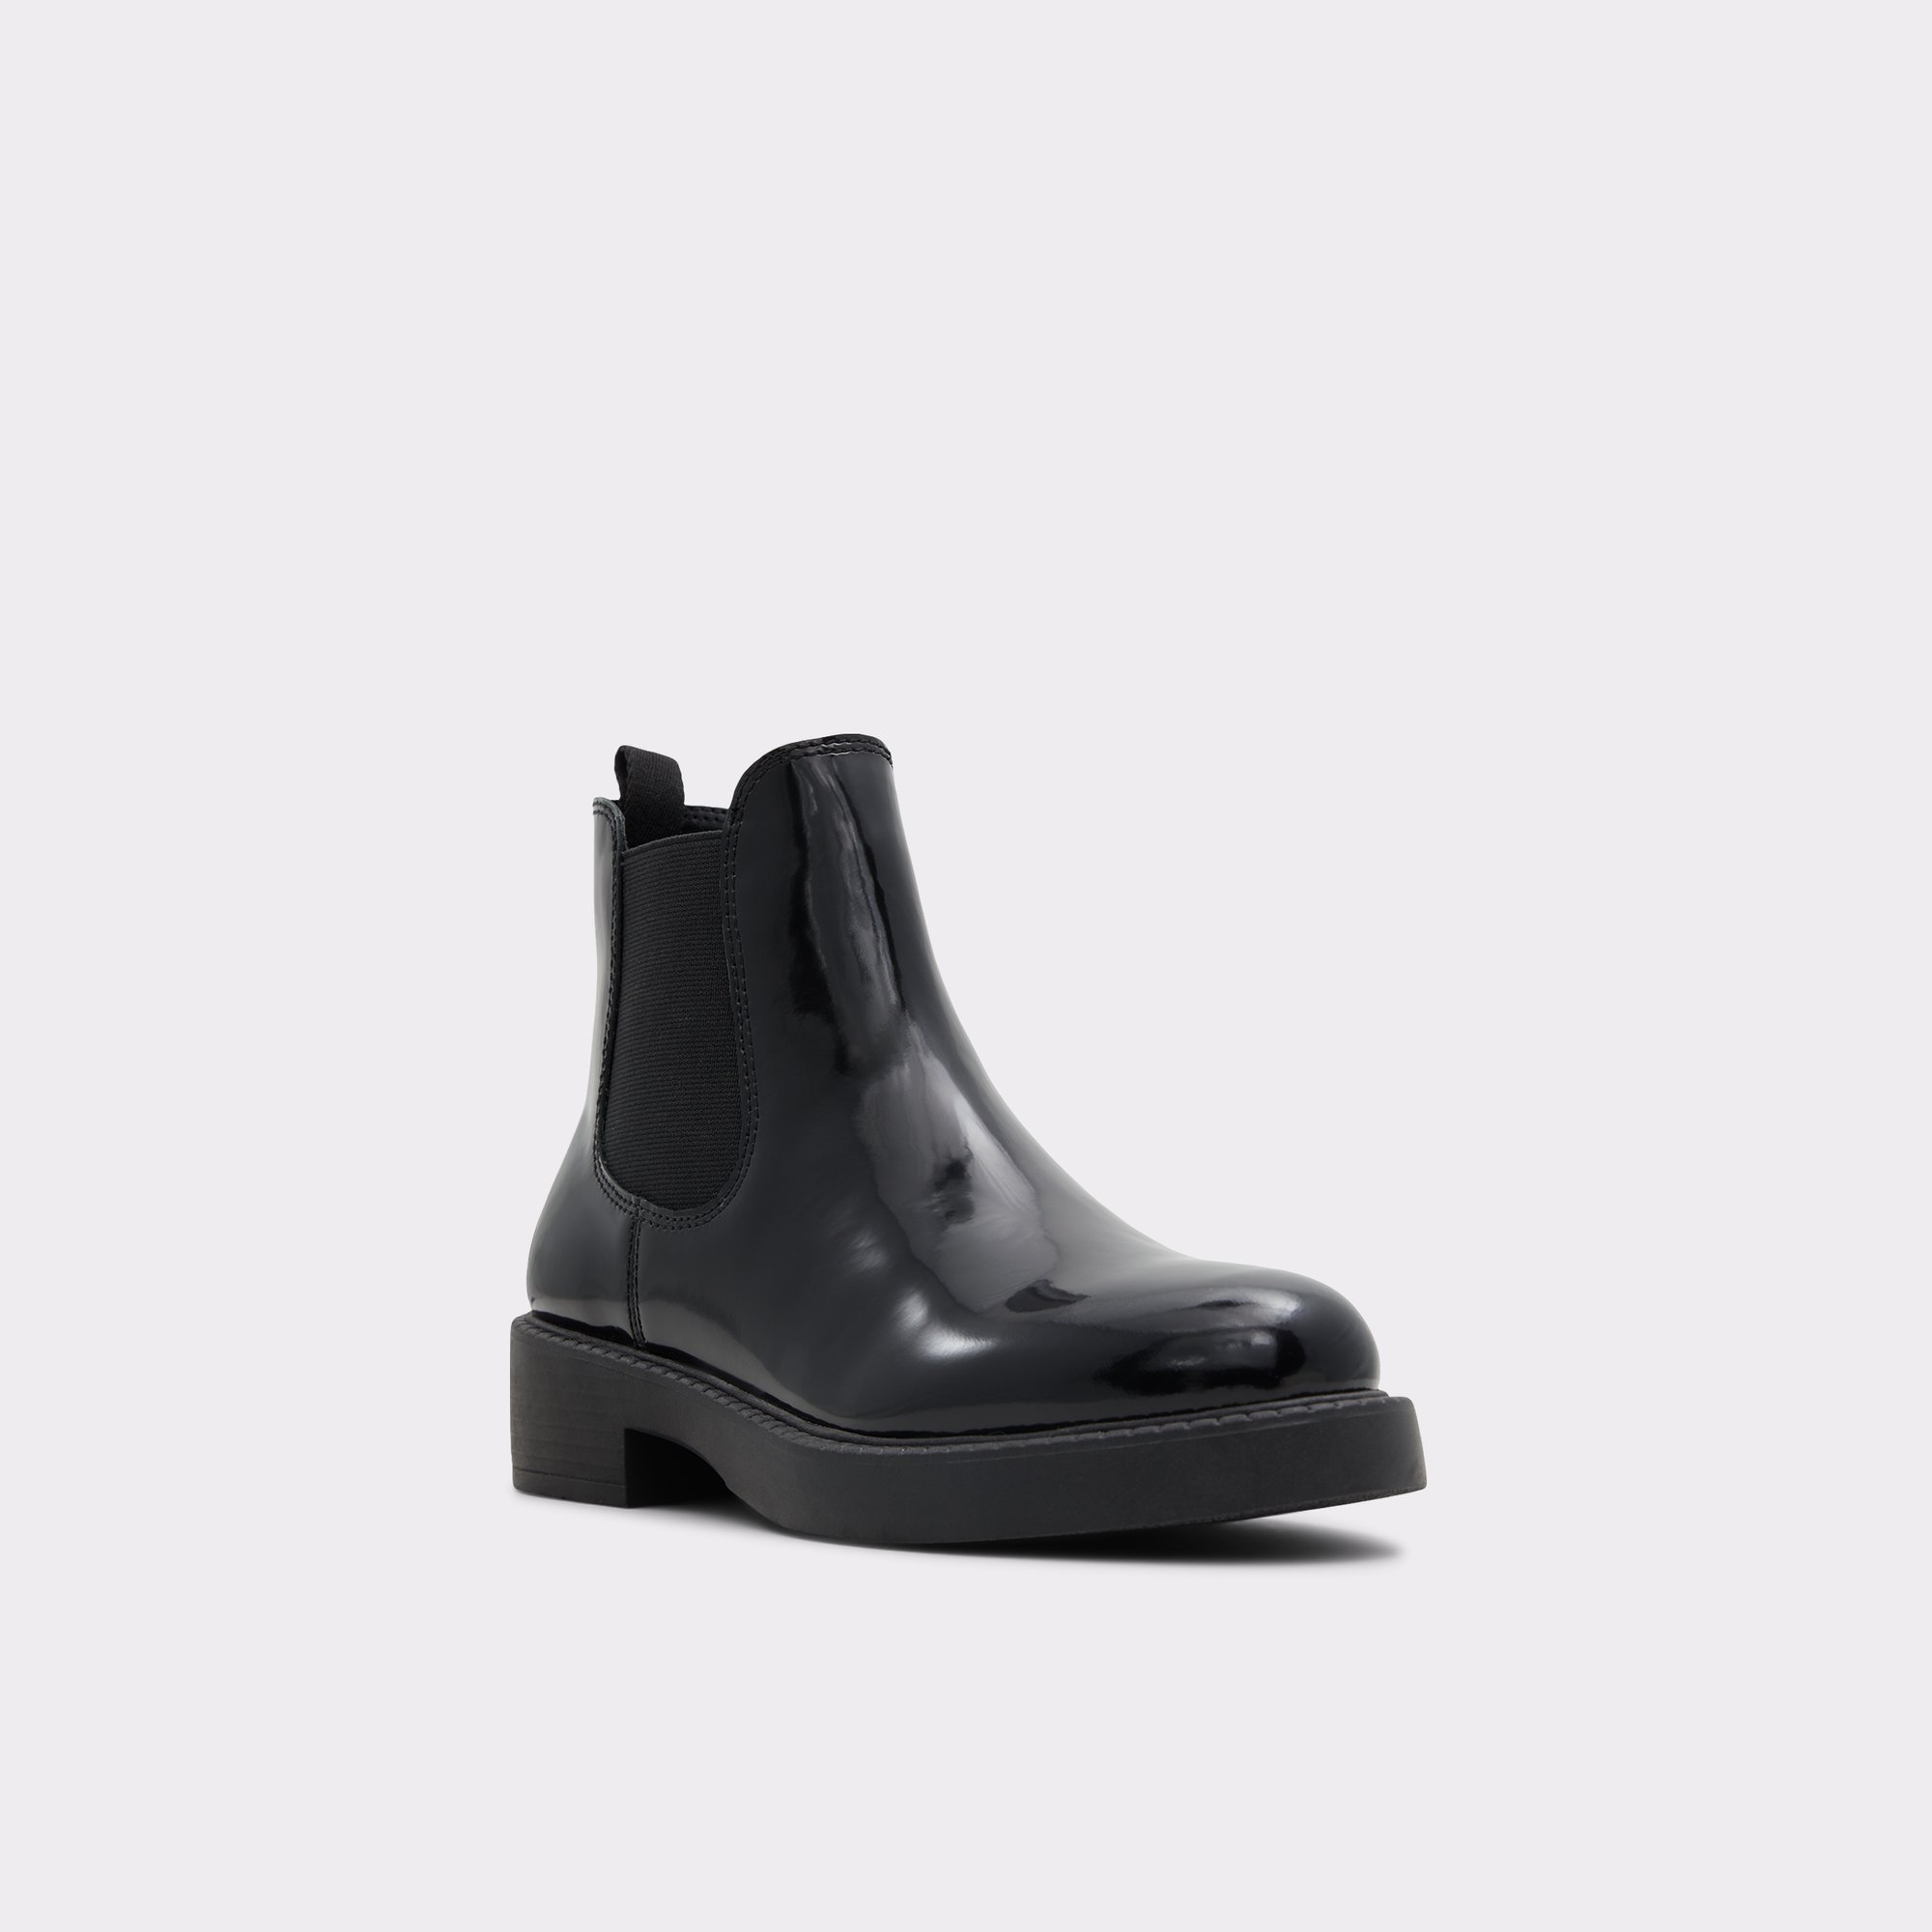 May Black Leather Shiny Women's Chelsea boots | ALDO US